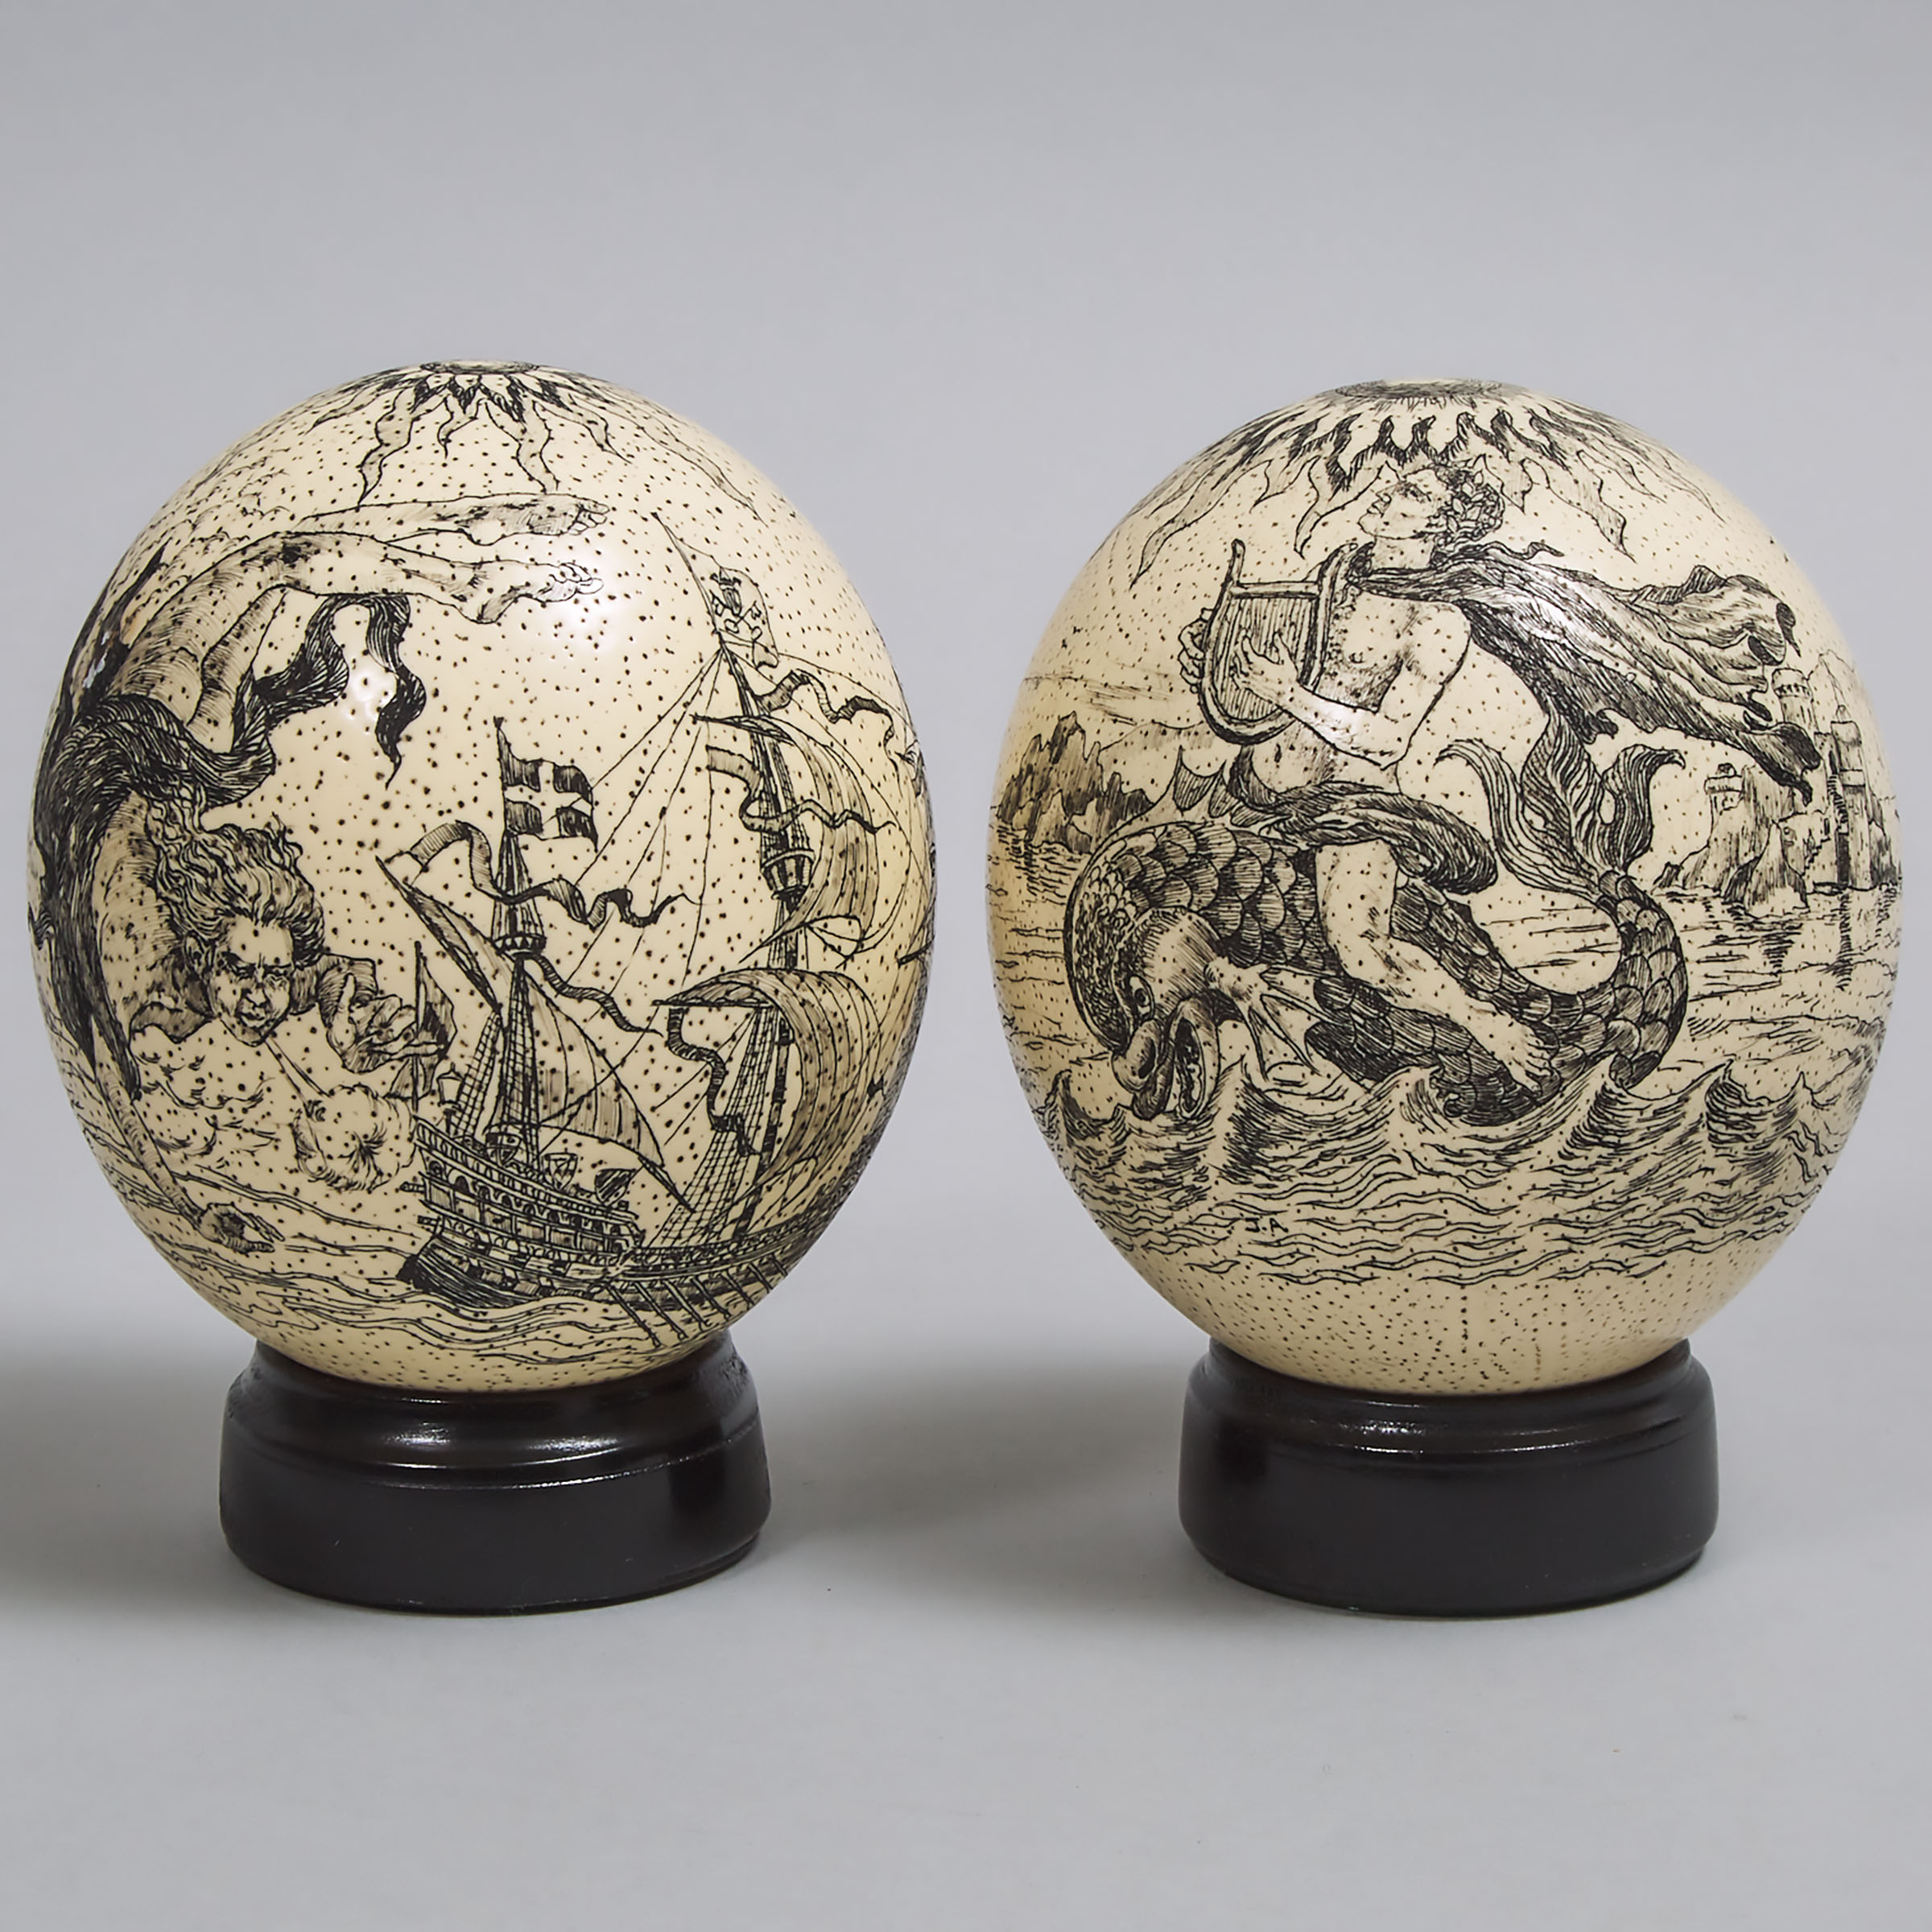 Pair of Engraved Ostrich Eggs, mid 20th century